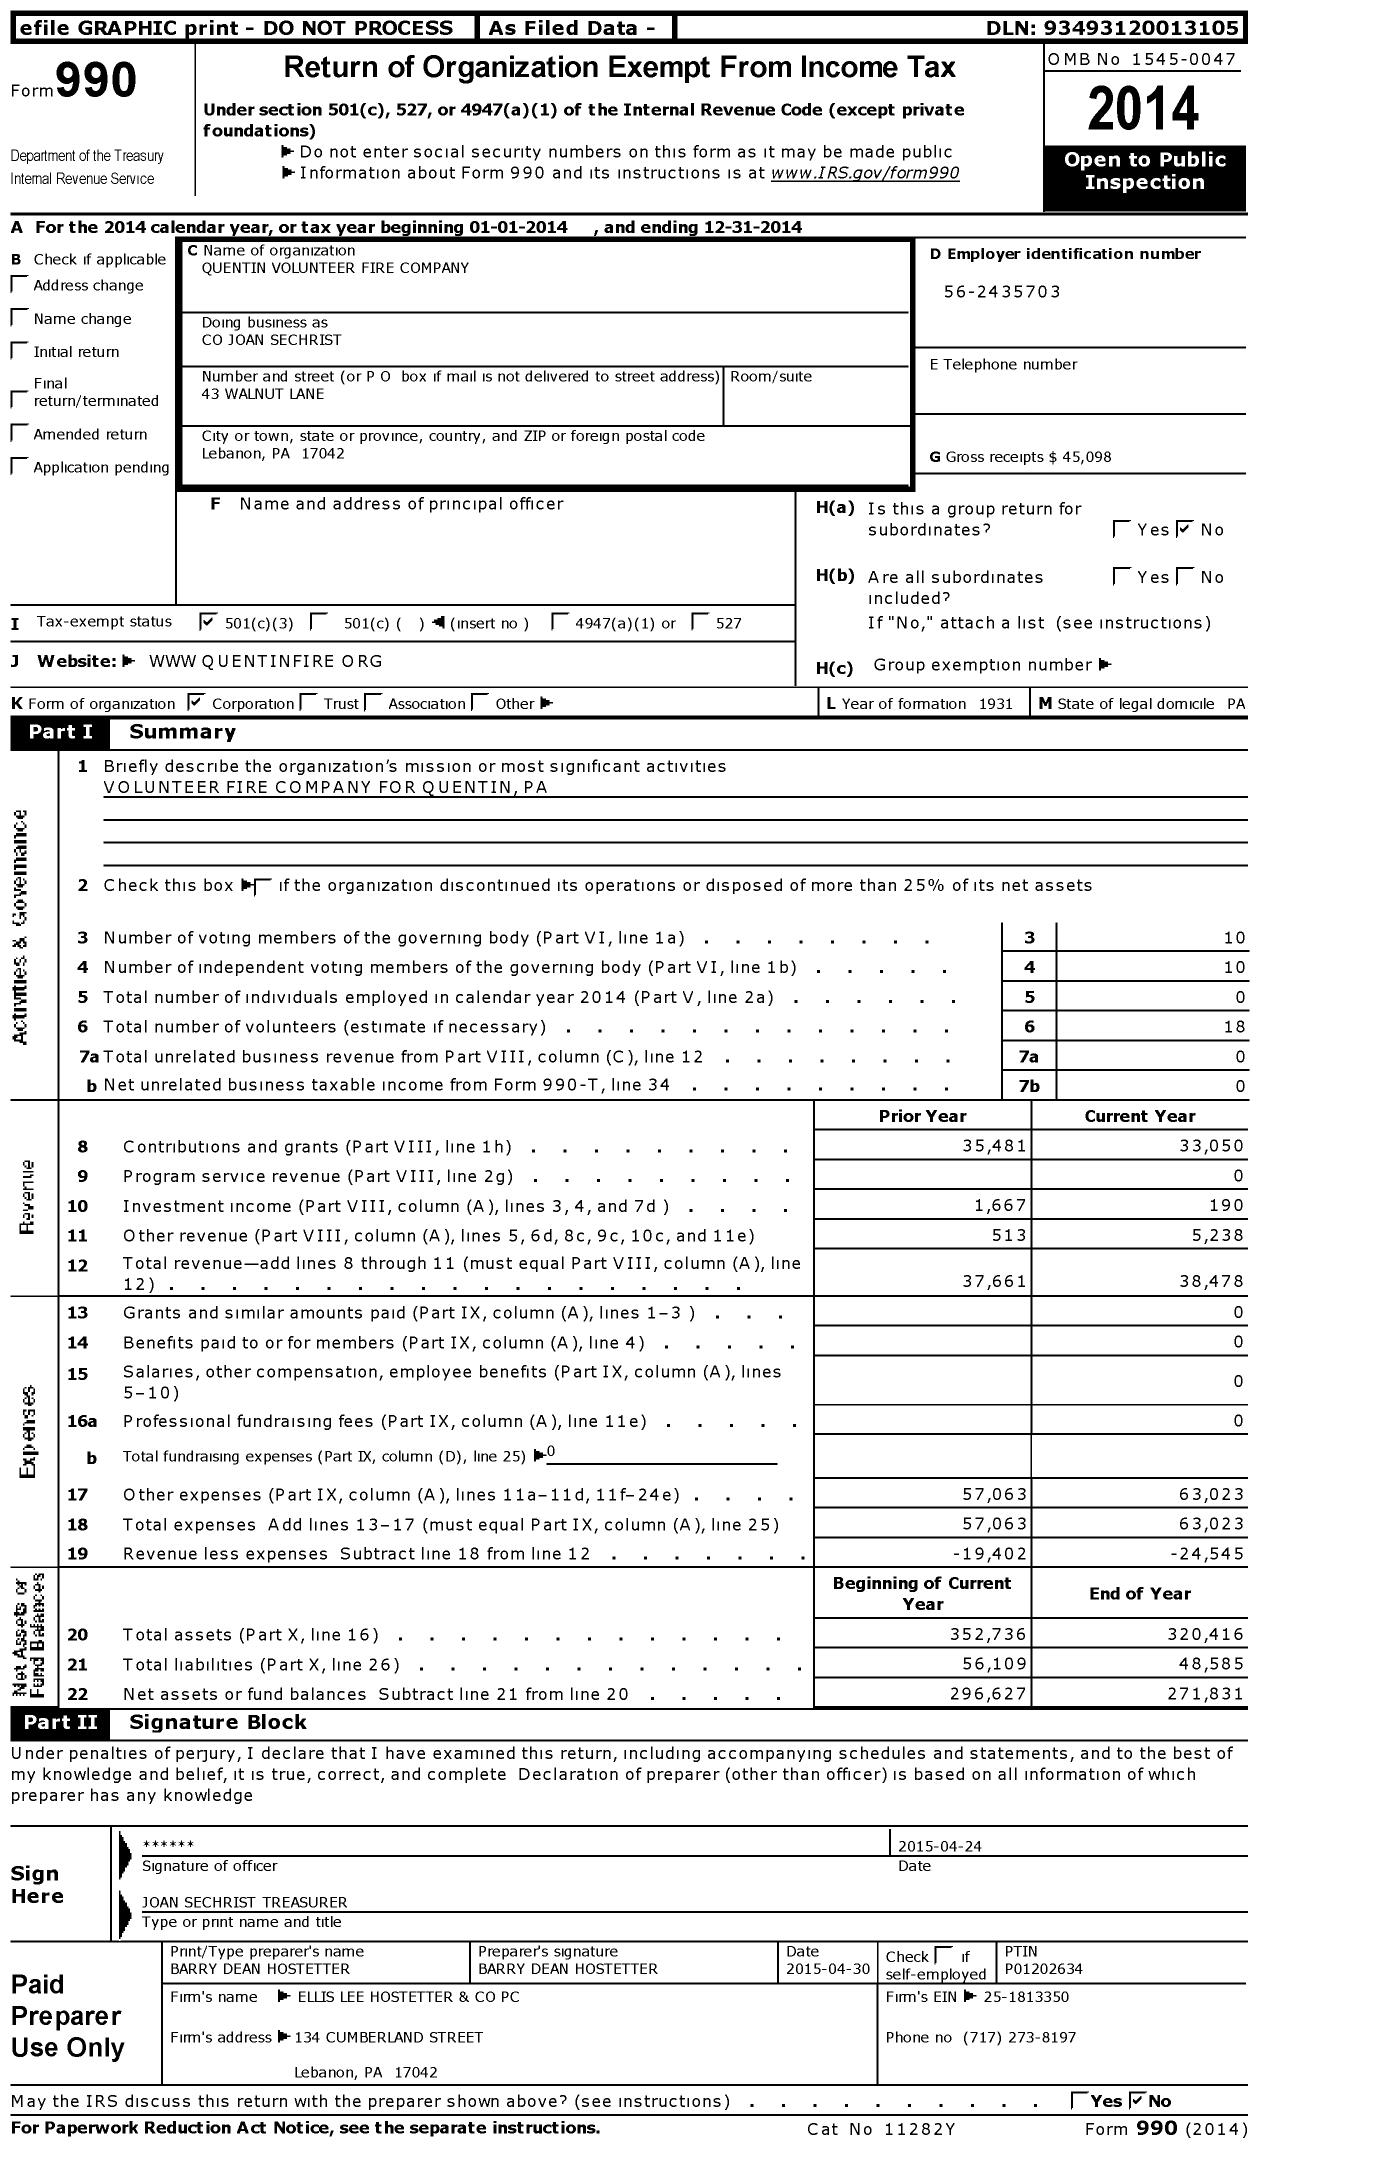 Image of first page of 2014 Form 990 for Quentin Volunteer Fire Company